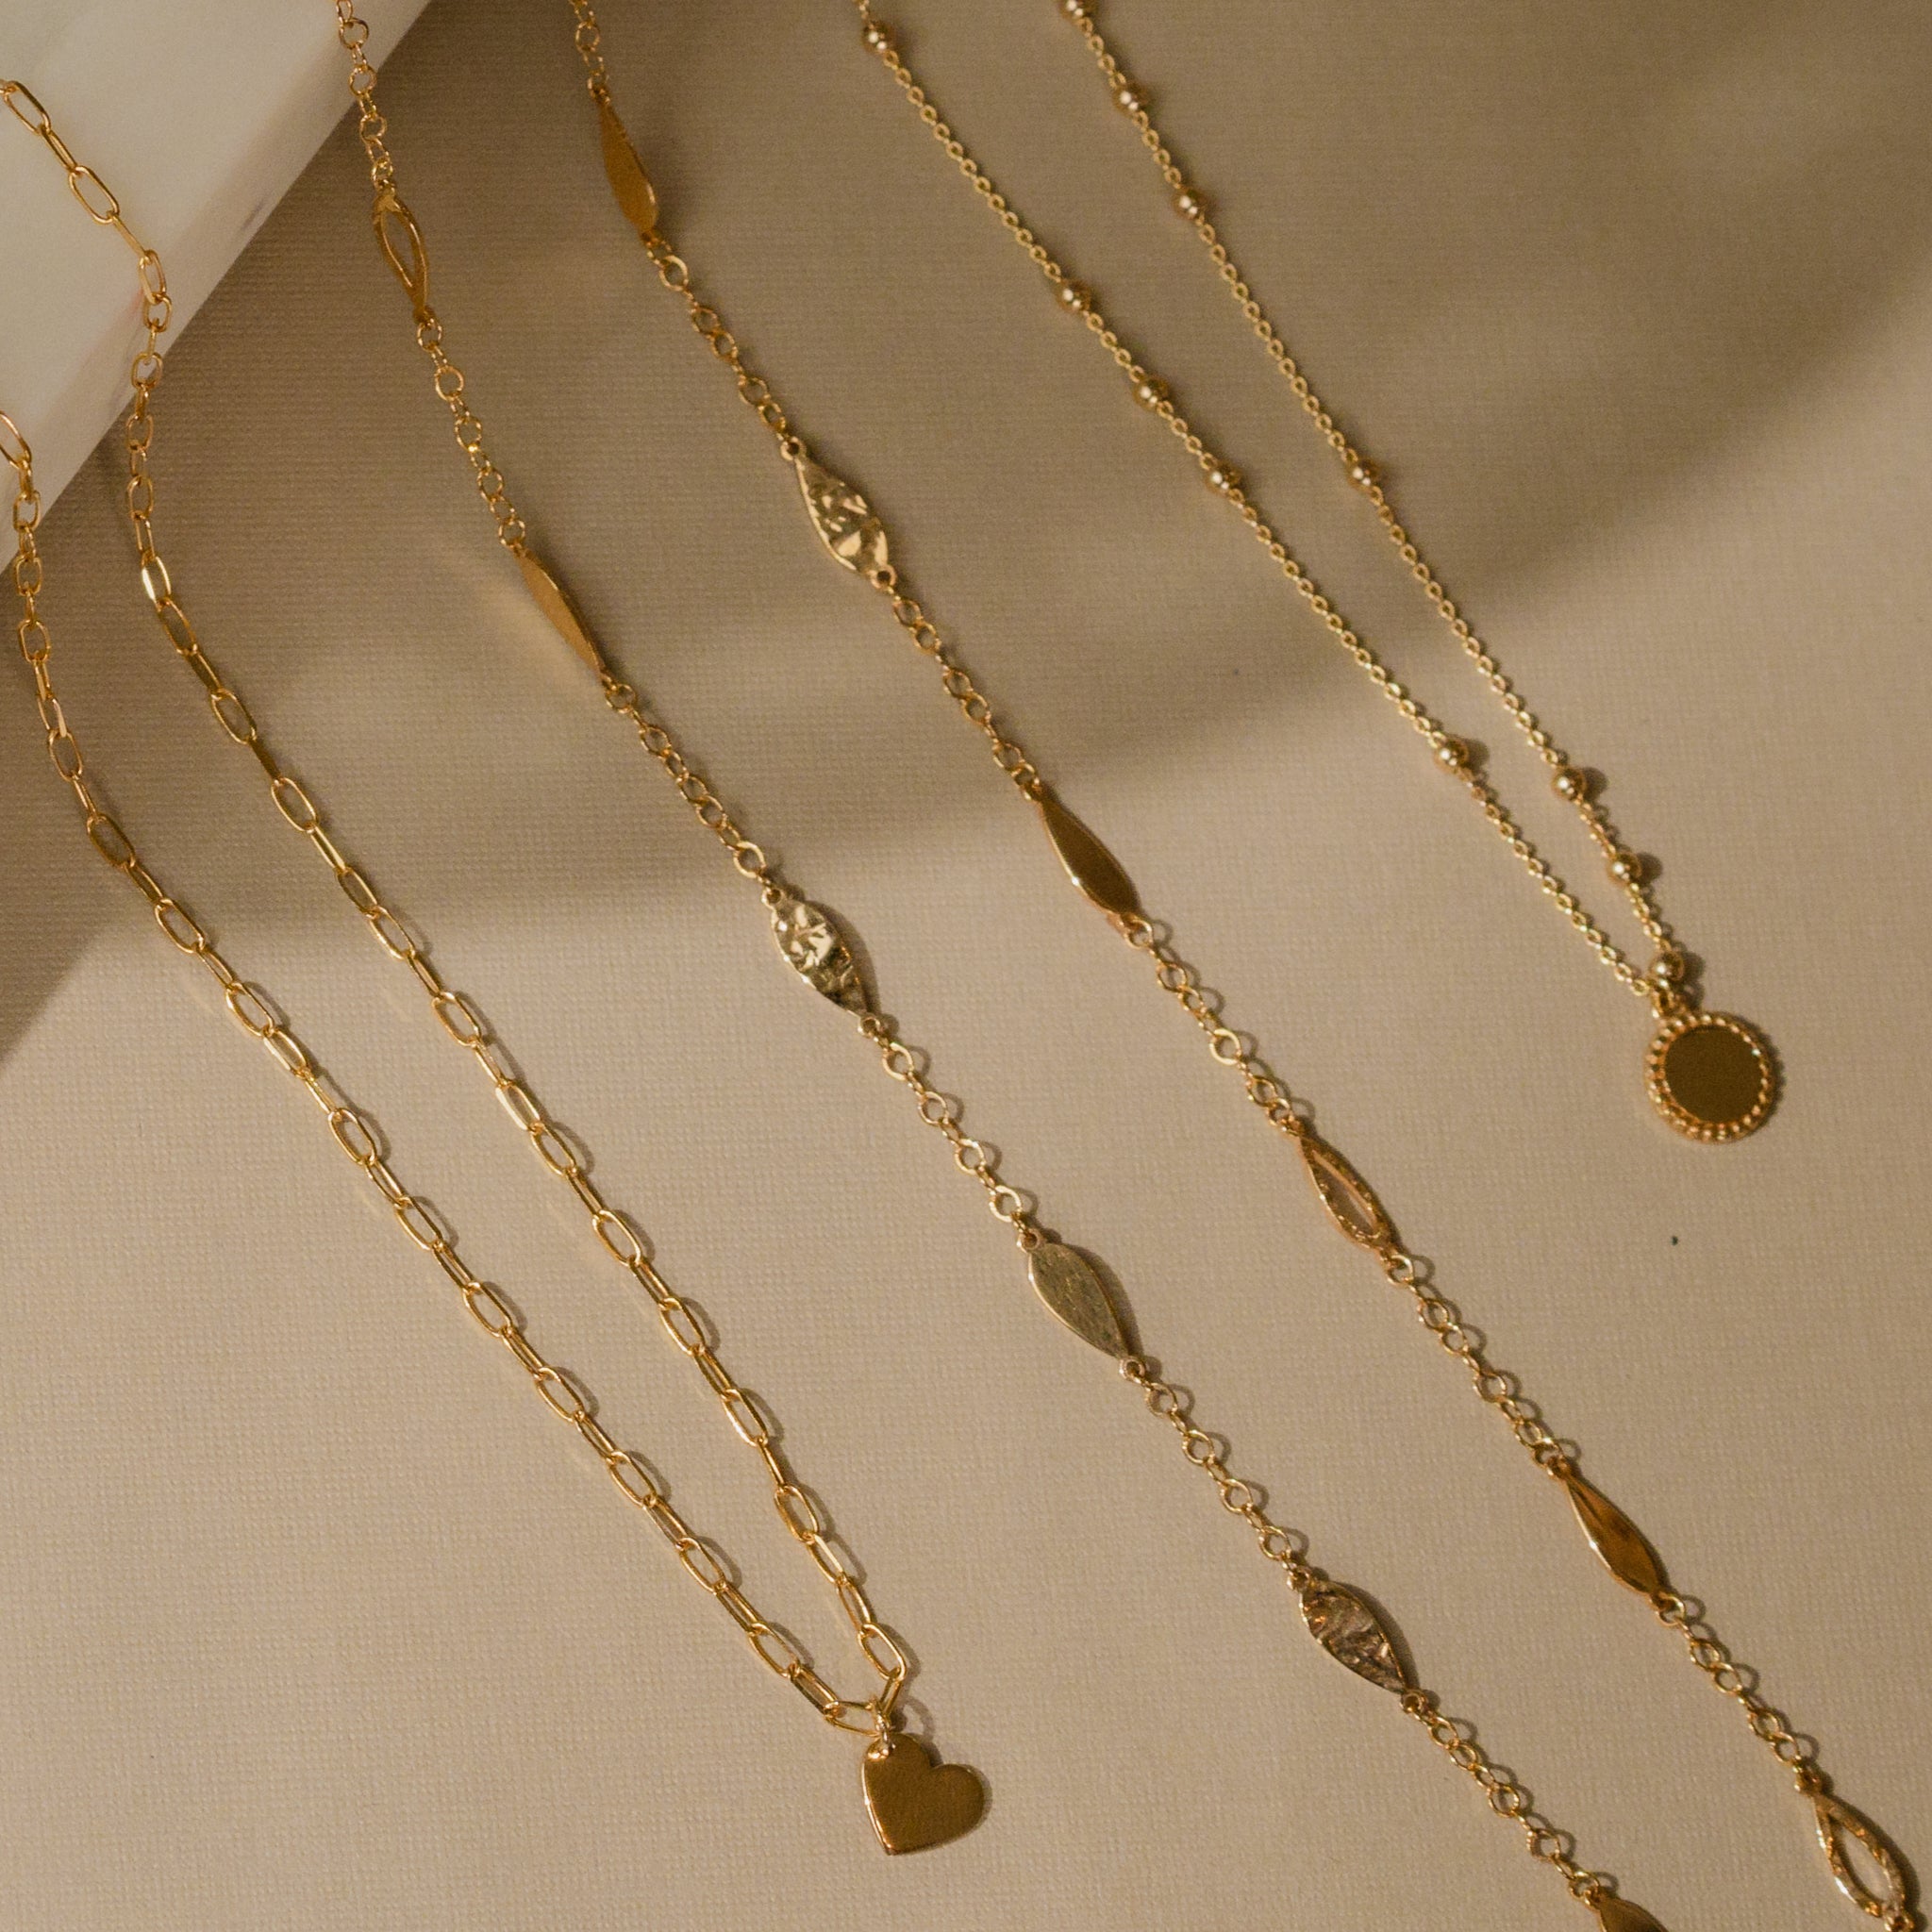 files/Mix_necklaces.jpg